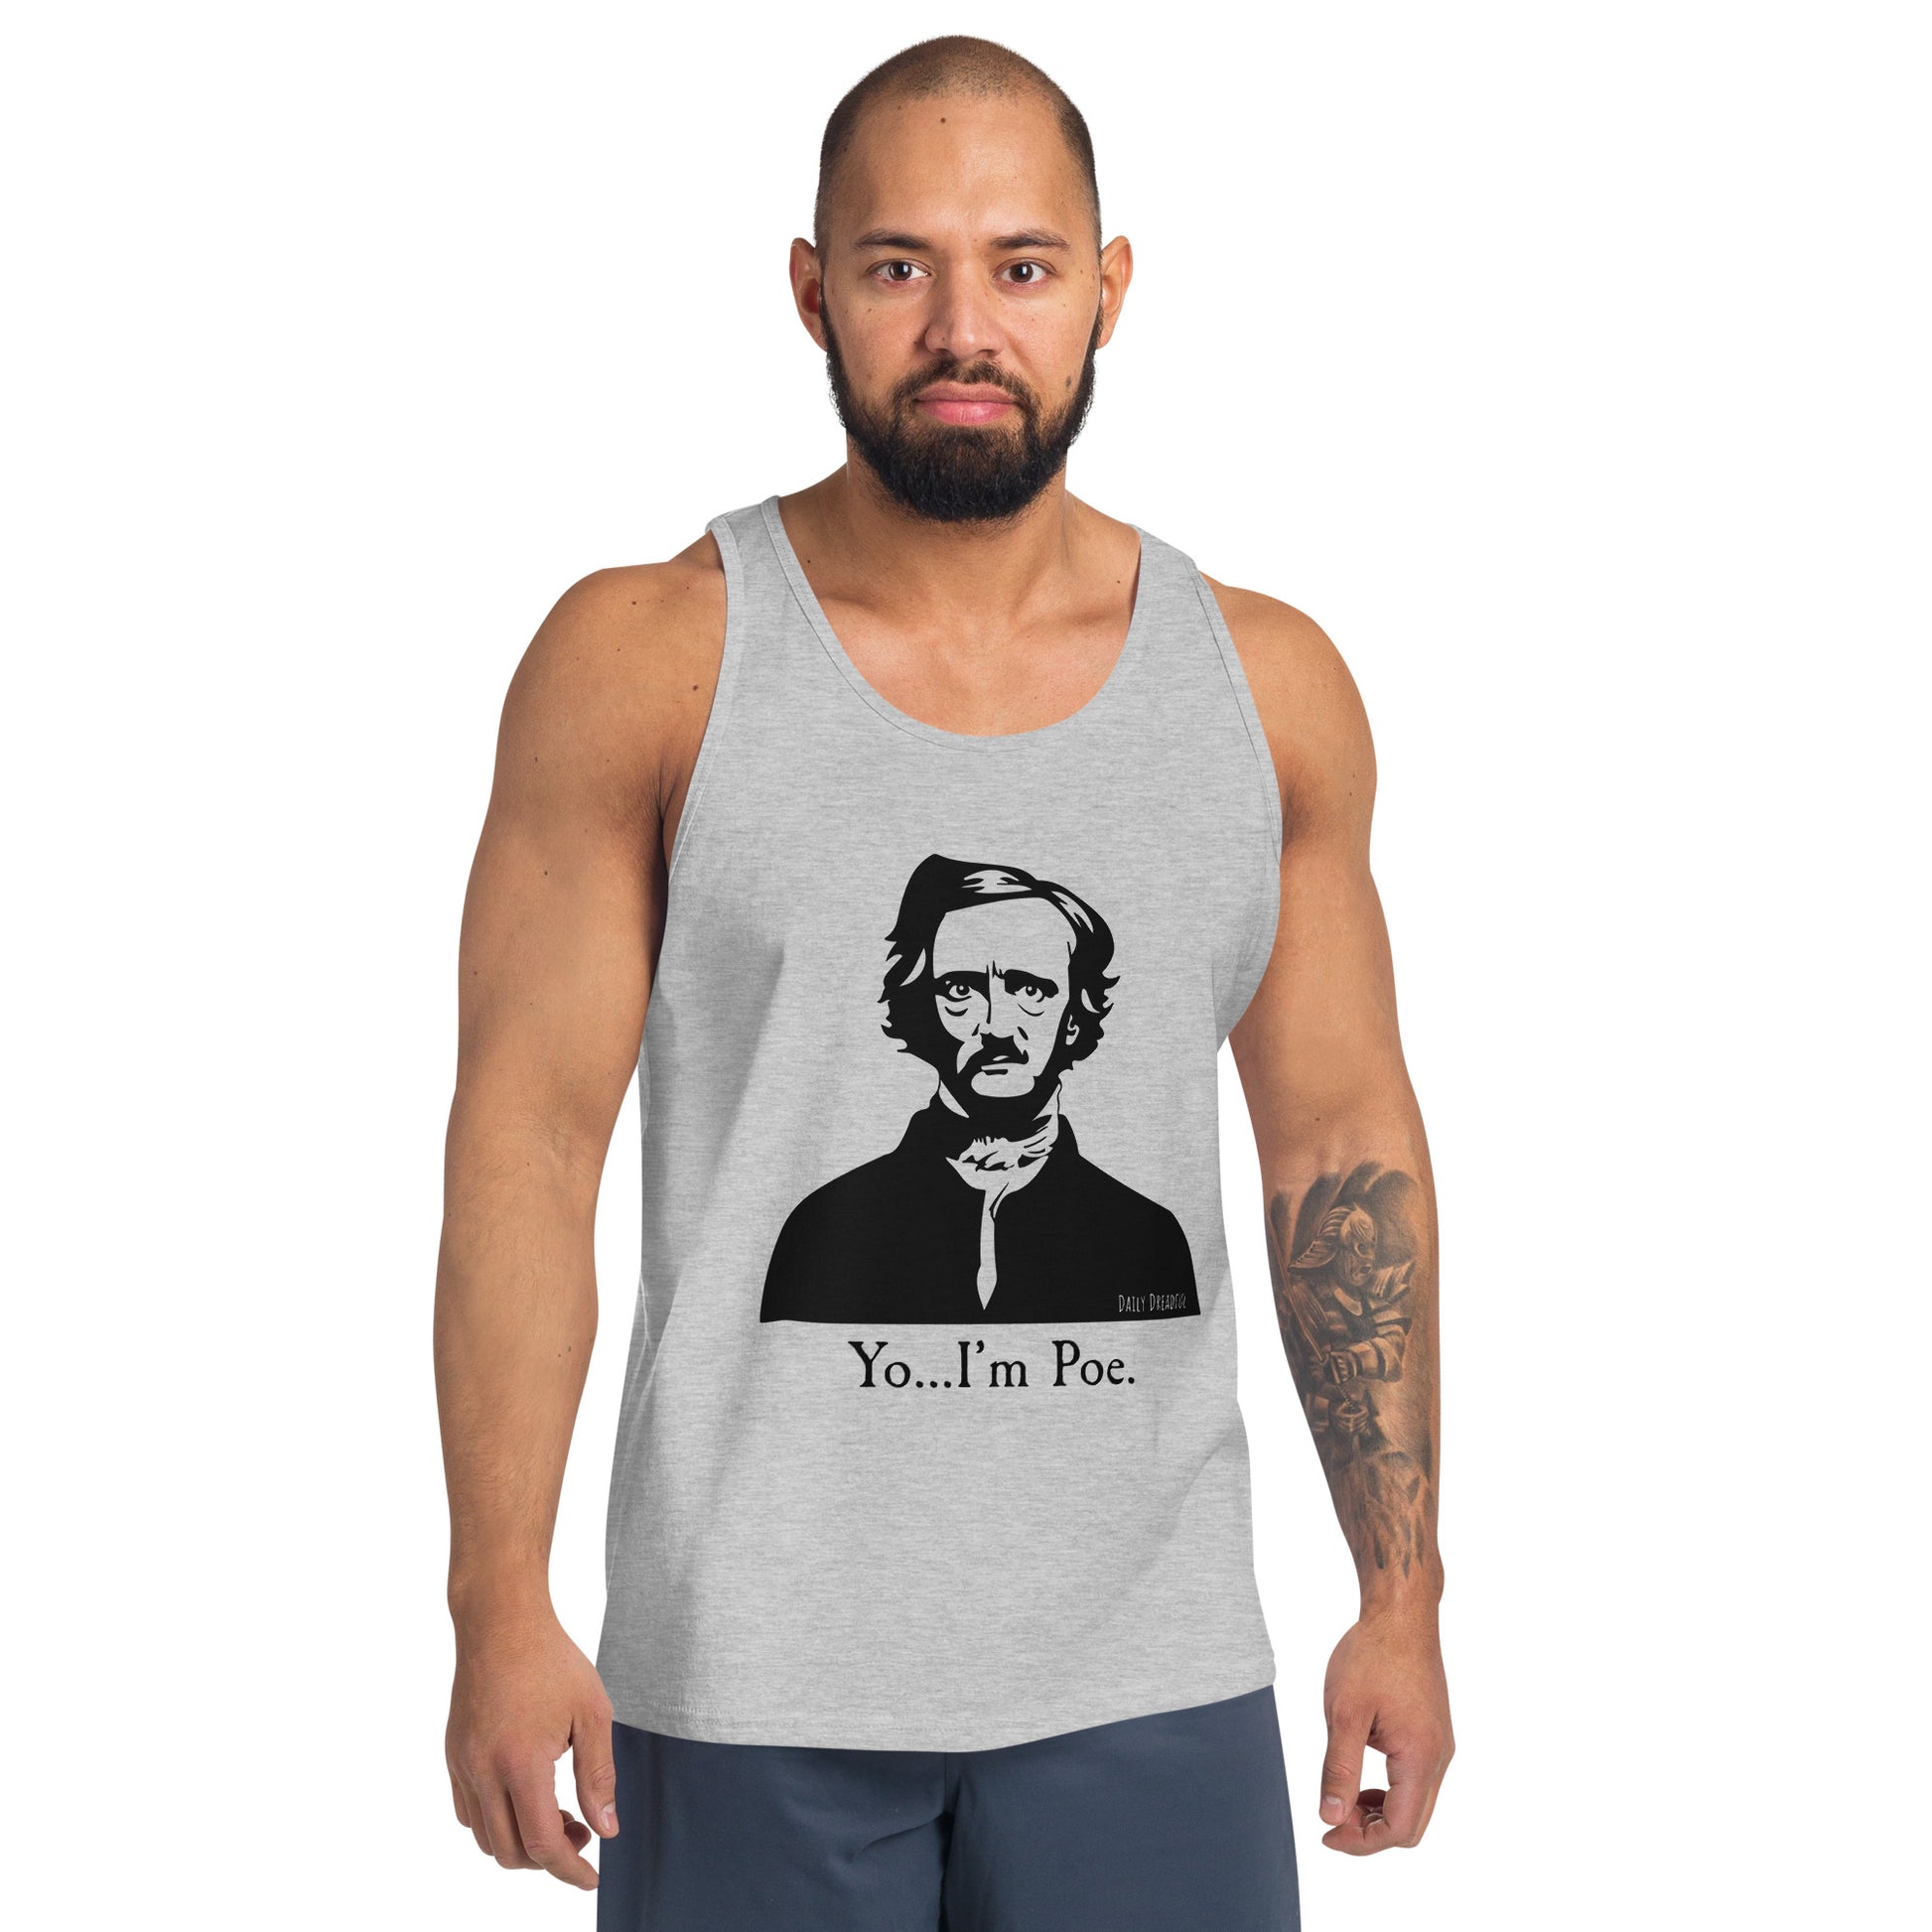 athletic heather "Yo I'm Poe" Men's Tank Top from Daily Dreadful